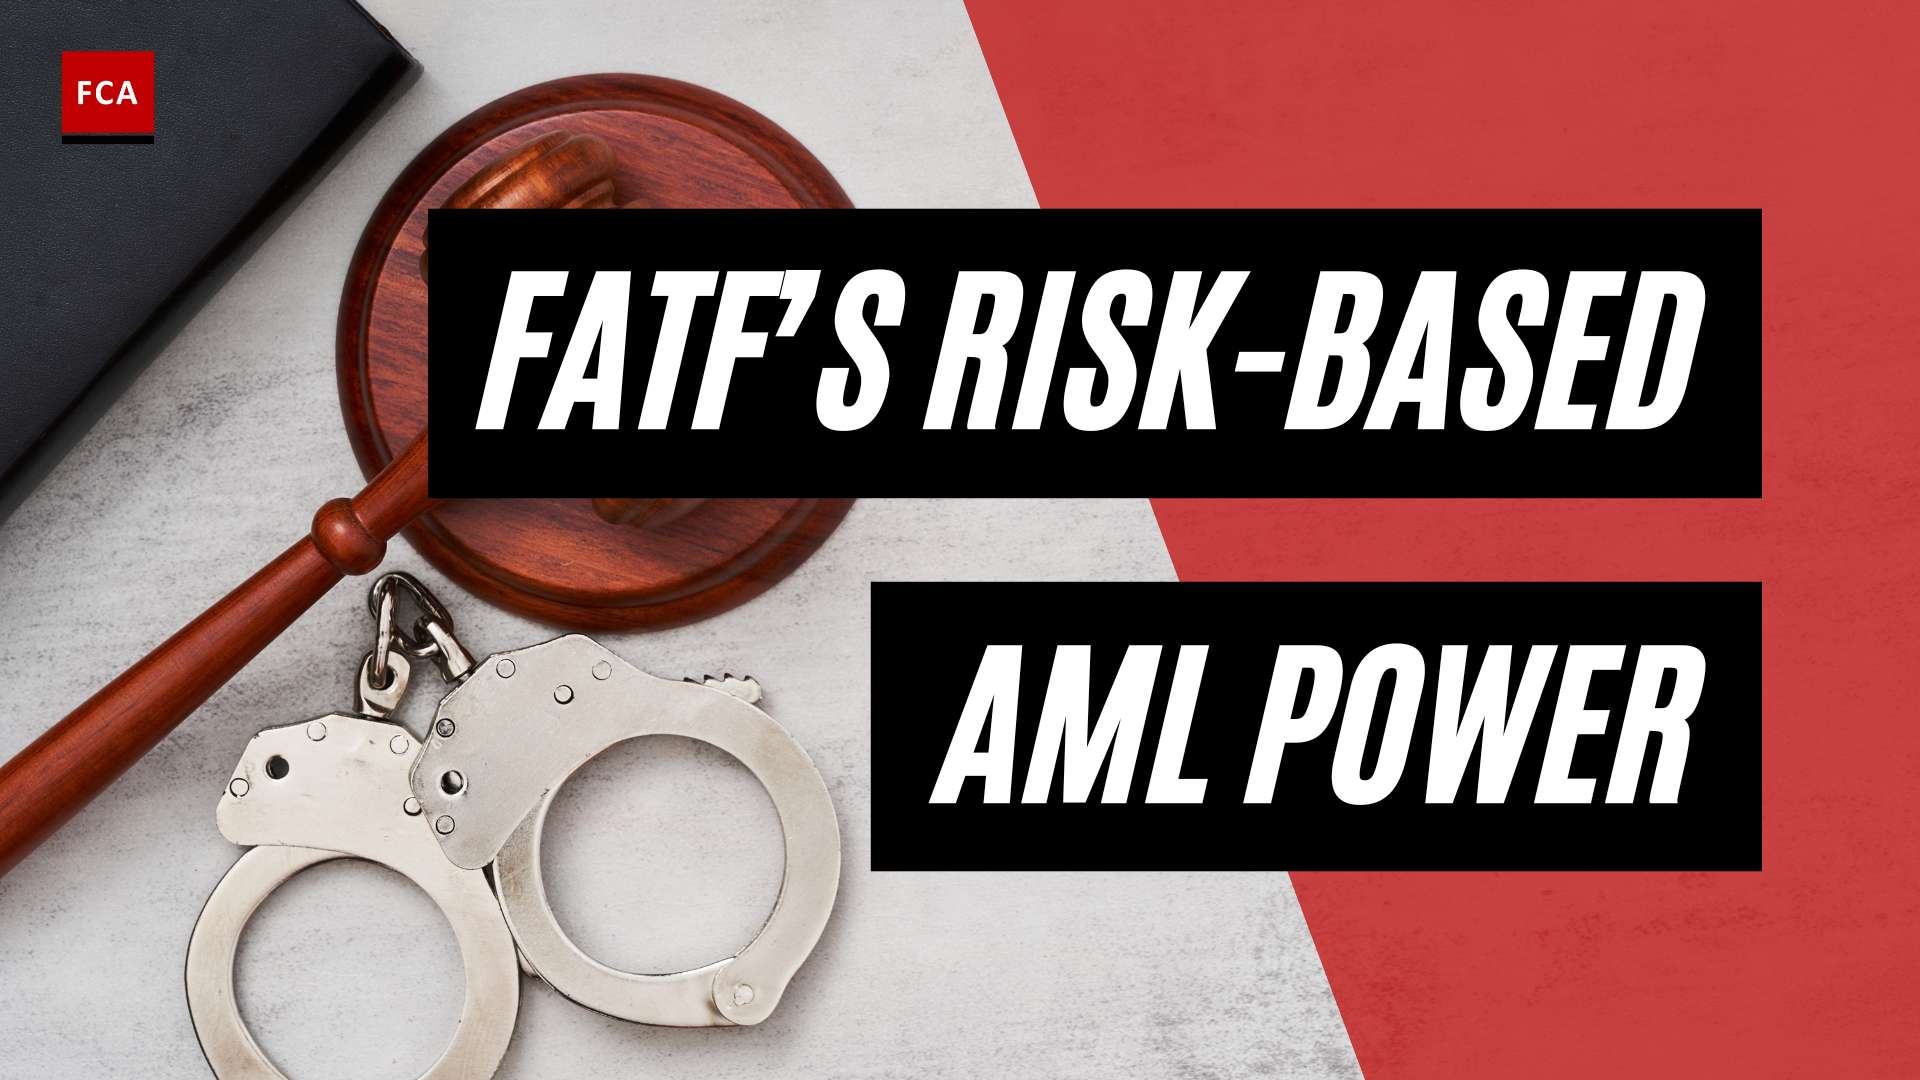 Achieving Aml Excellence: Leveraging The Power Of Fatfs Risk-Based Approach